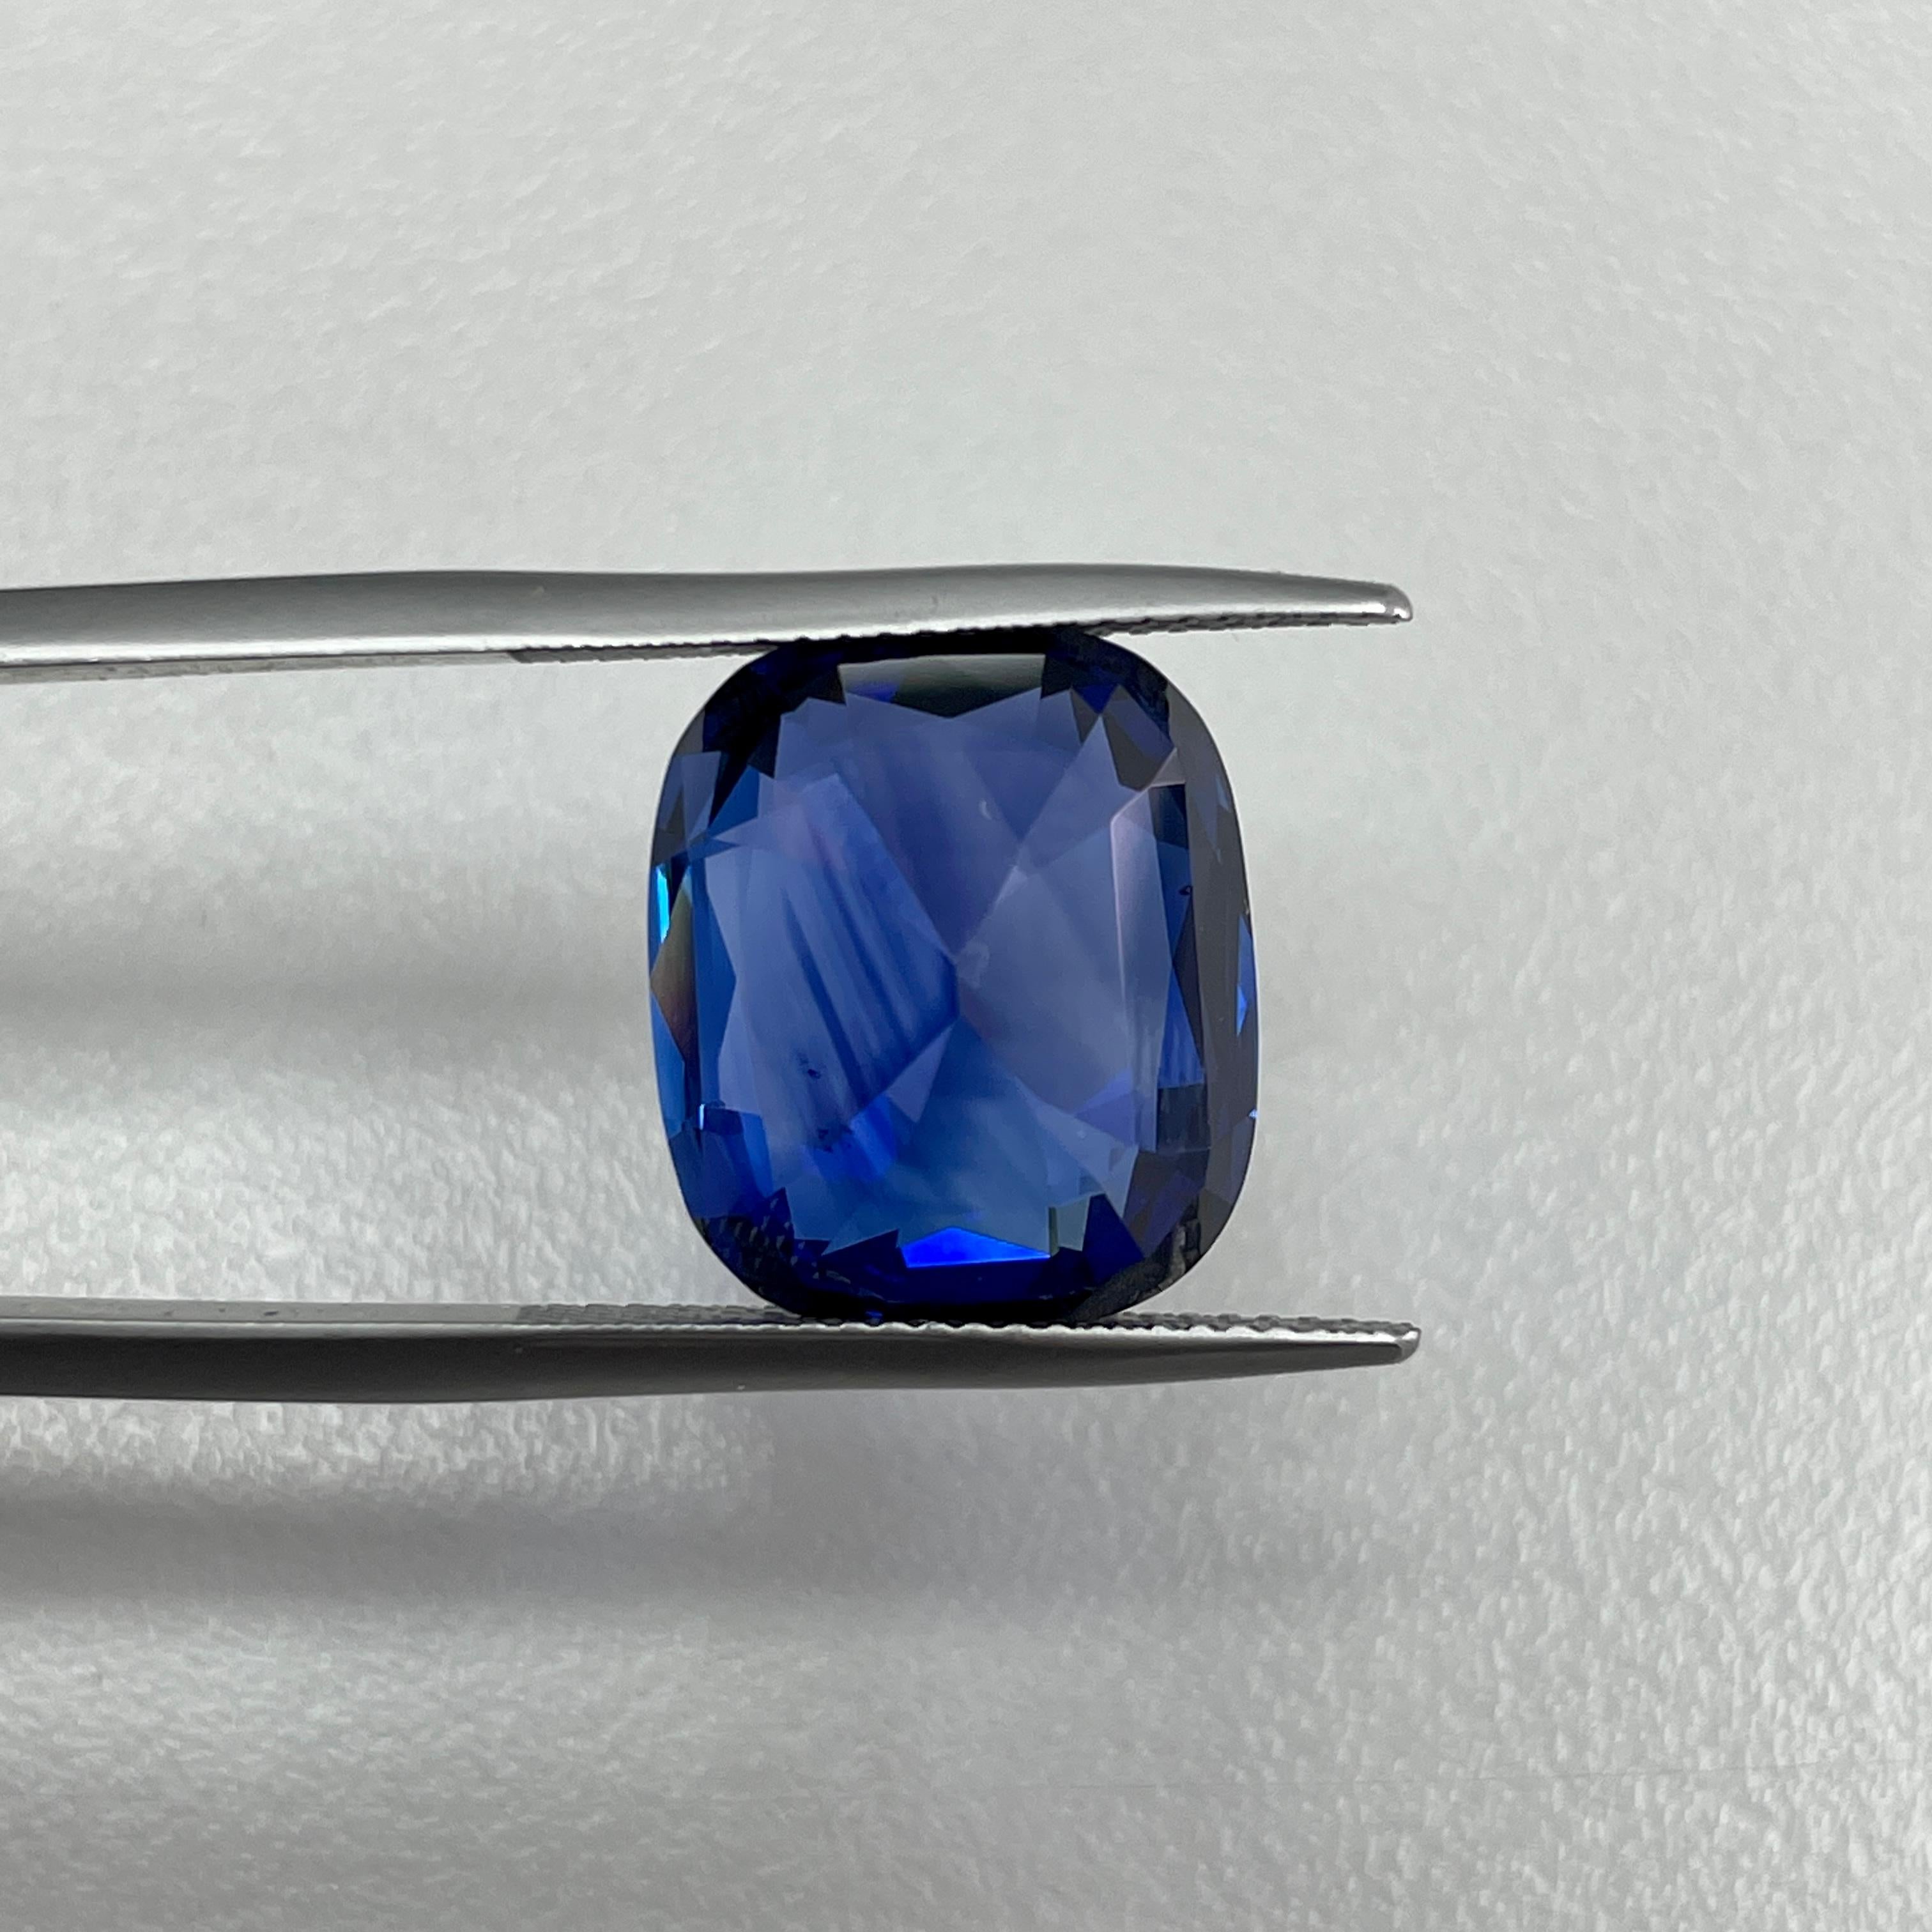 14.98Ct blue sapphire with fair clarity (fully eye clean). Also has excellent cutting and good polish to show a velvety shine, would look lovely in jewelry.
We can help you make your dream jewelry piece with this. 